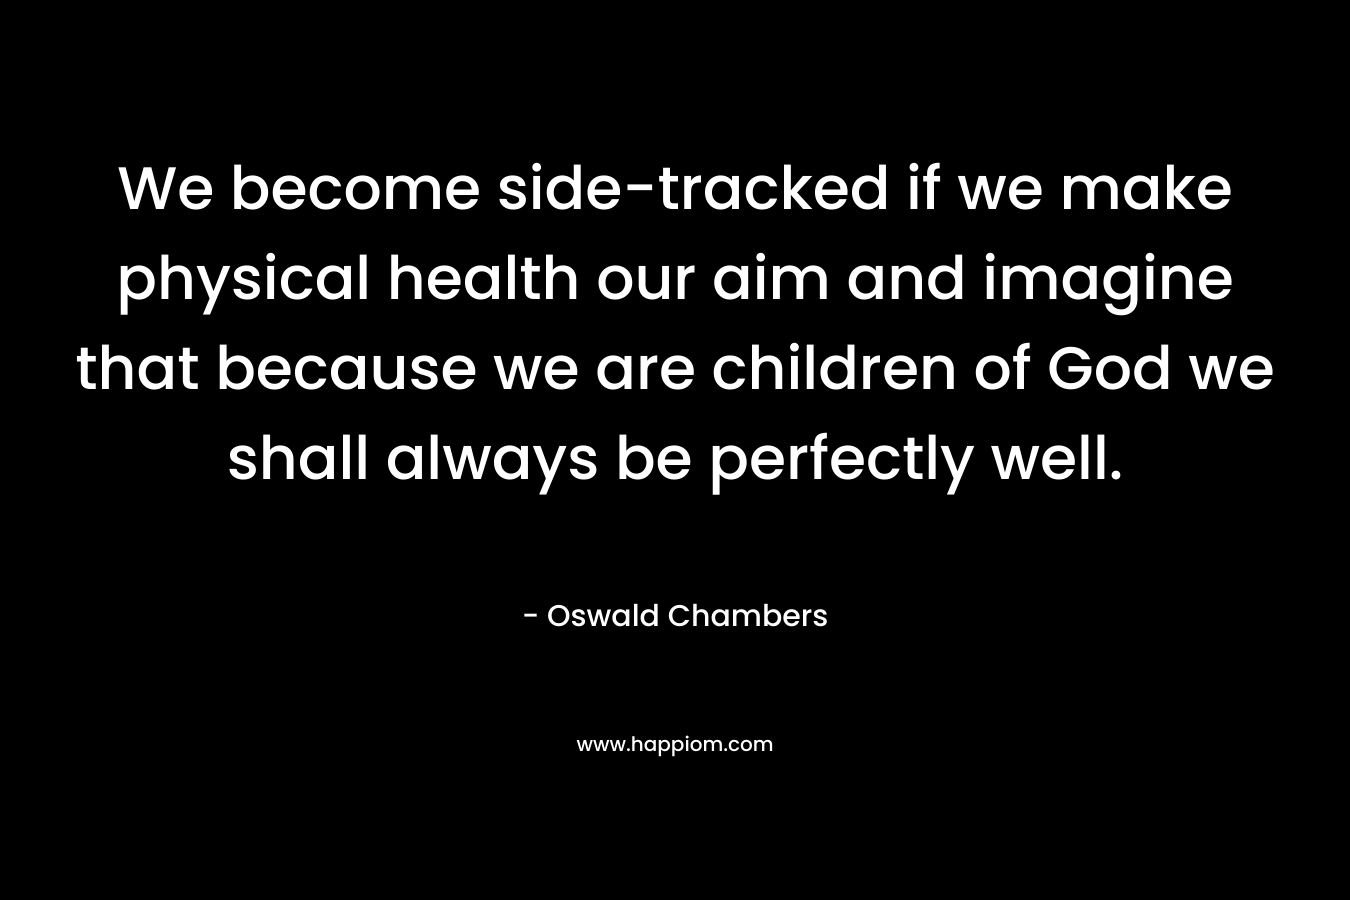 We become side-tracked if we make physical health our aim and imagine that because we are children of God we shall always be perfectly well.